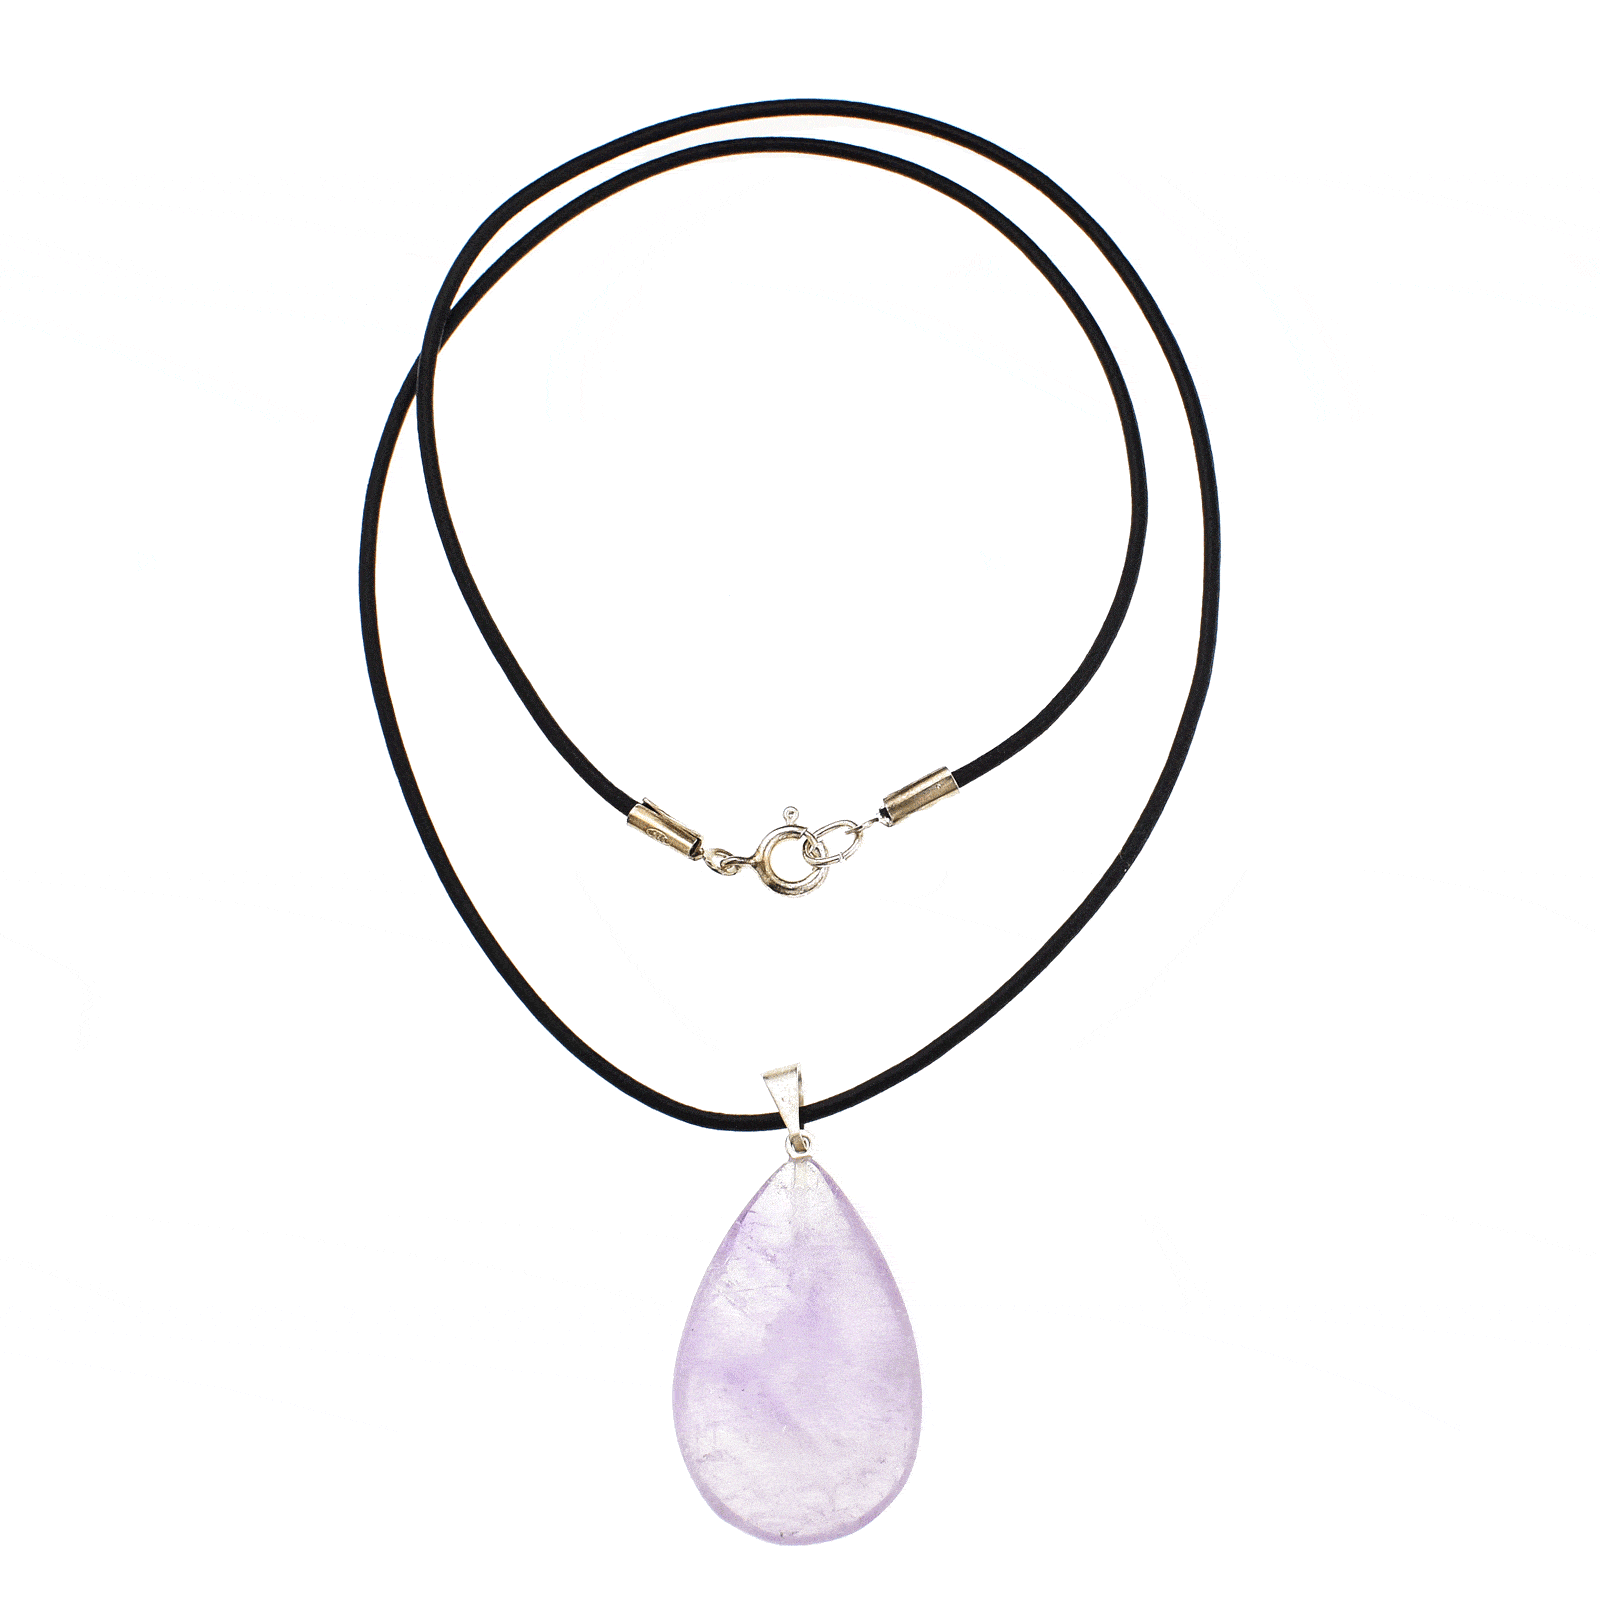 Natural Amethyst stone pendant, threaded on a black leather with clasp made of sterling silver. Buy online shop.